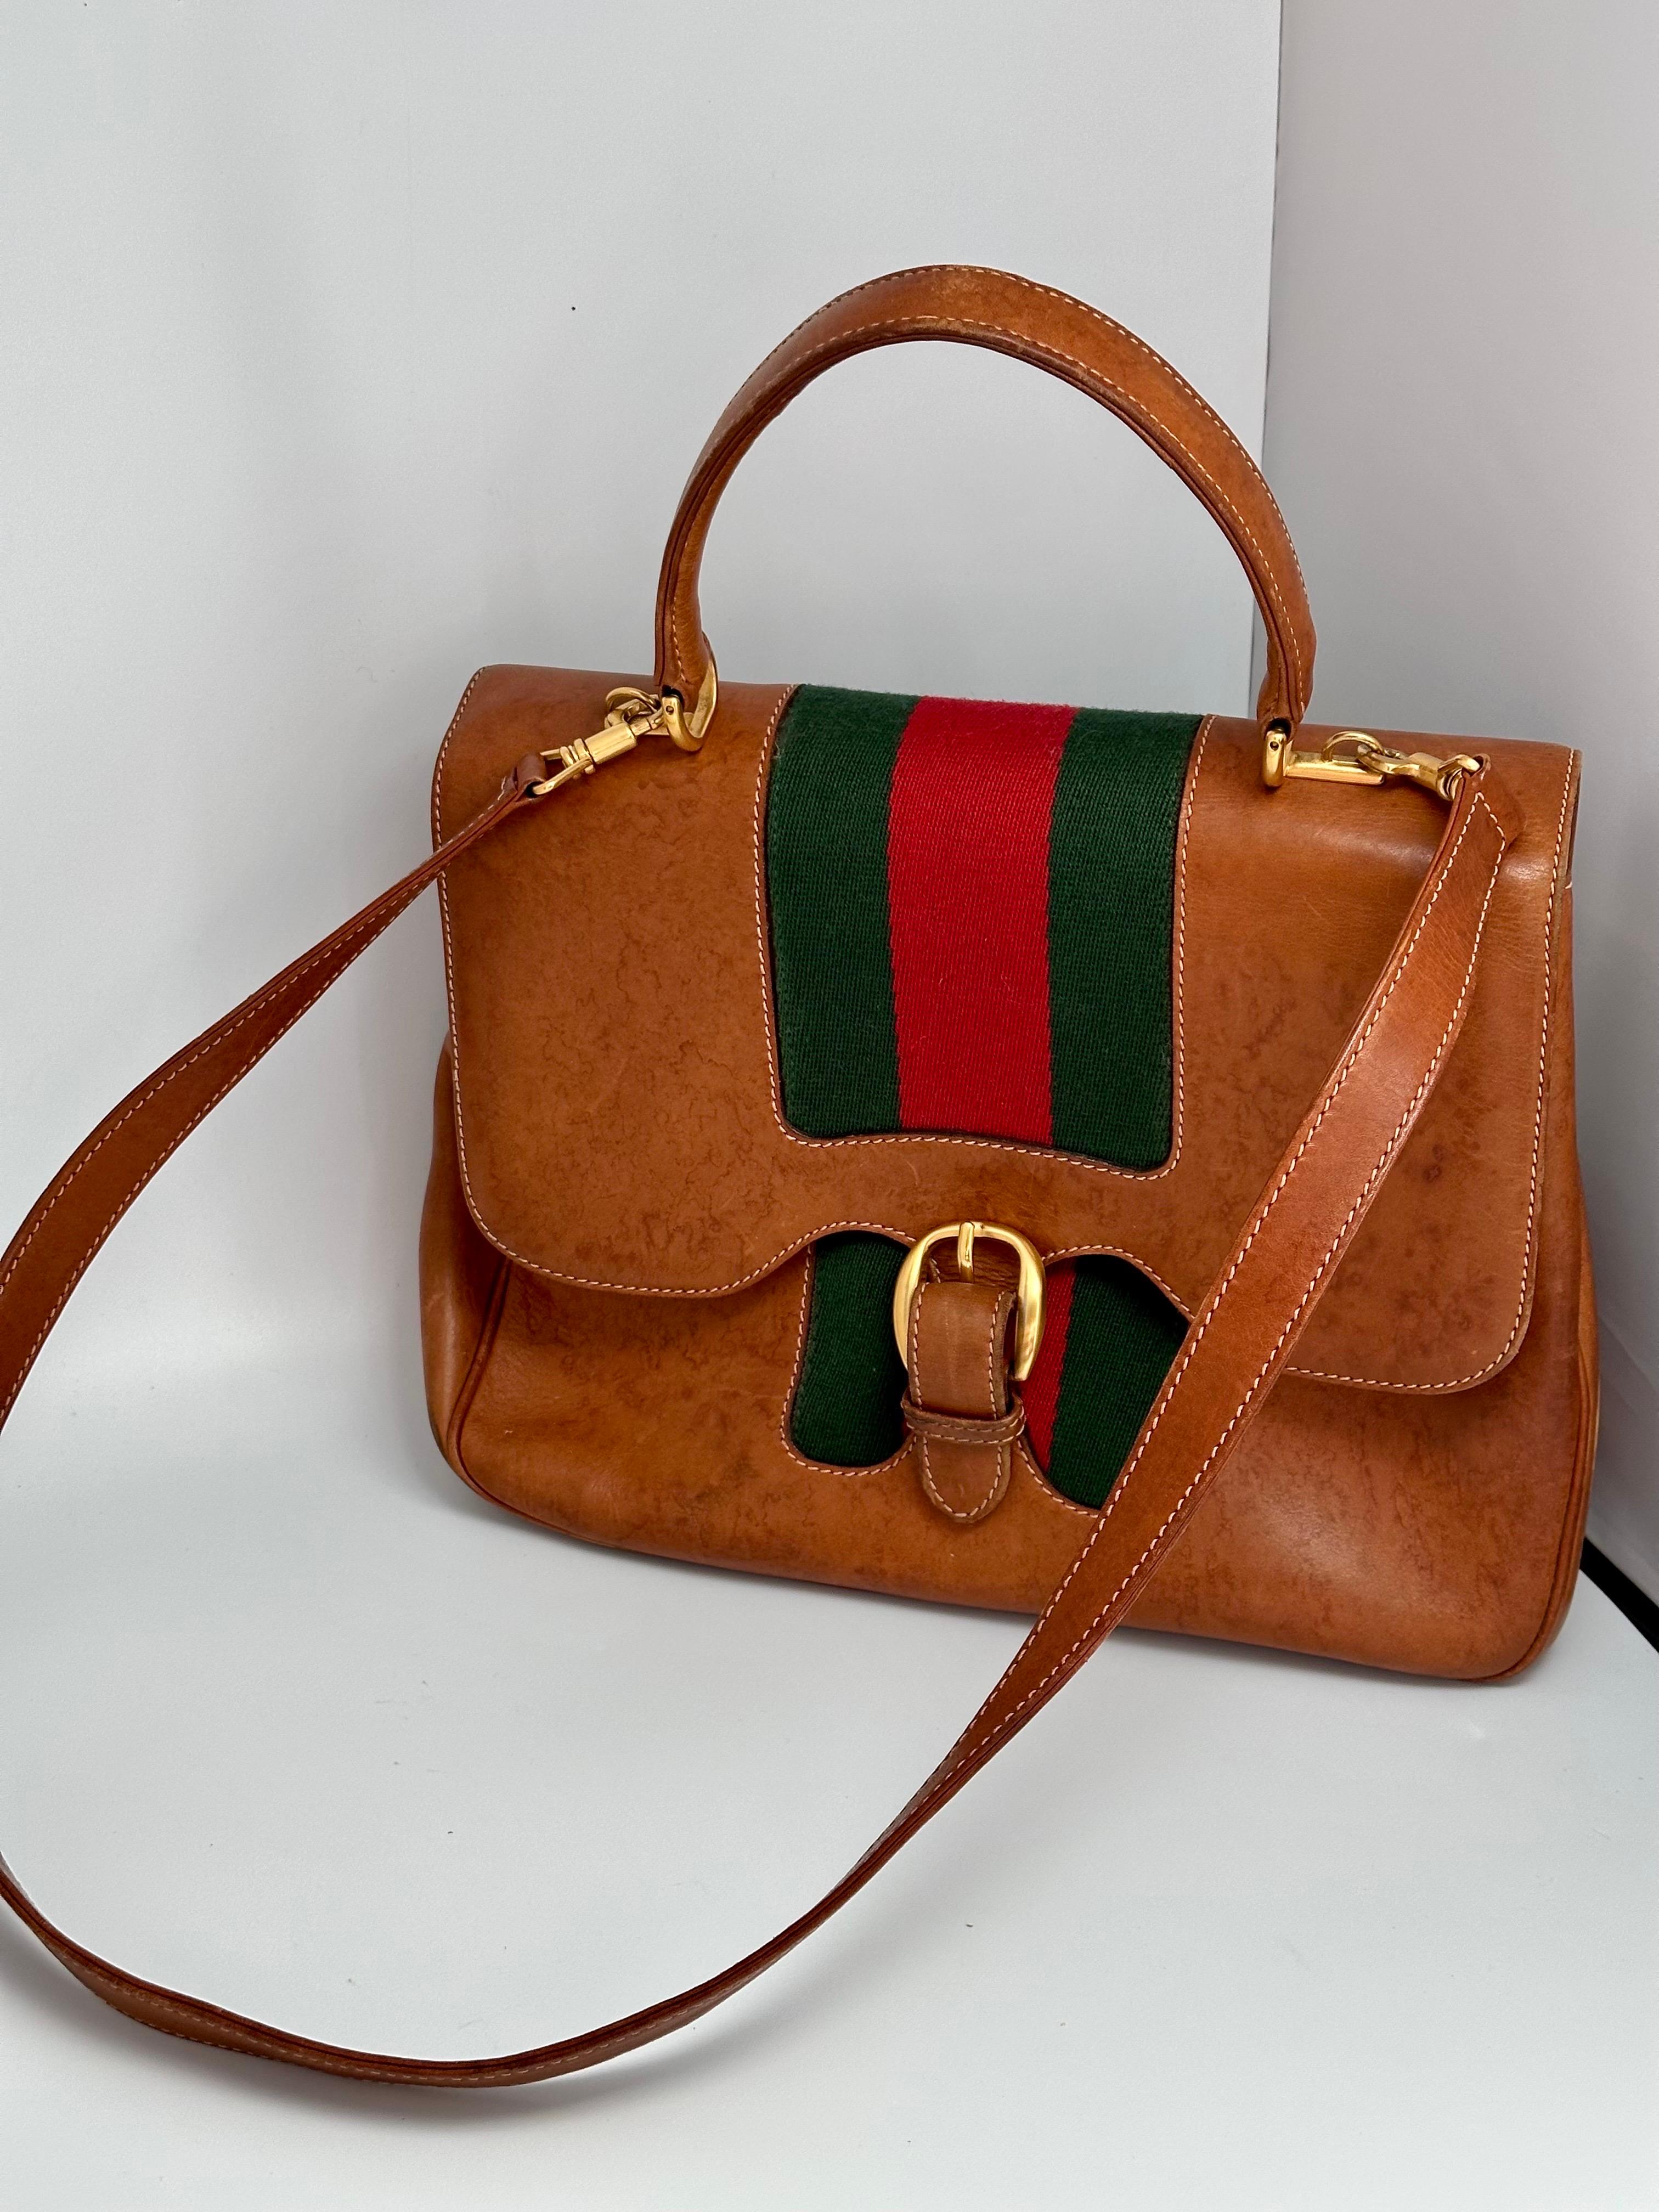 Gucci · Genuine Leather
Vintage Gucci handbag in tan leather with signature green and red fabric accent stripe.
 Inside is also Suede  lined. 
Leather has some dark patina or spots , please look at the pictures 
All Golden Hardware is in great